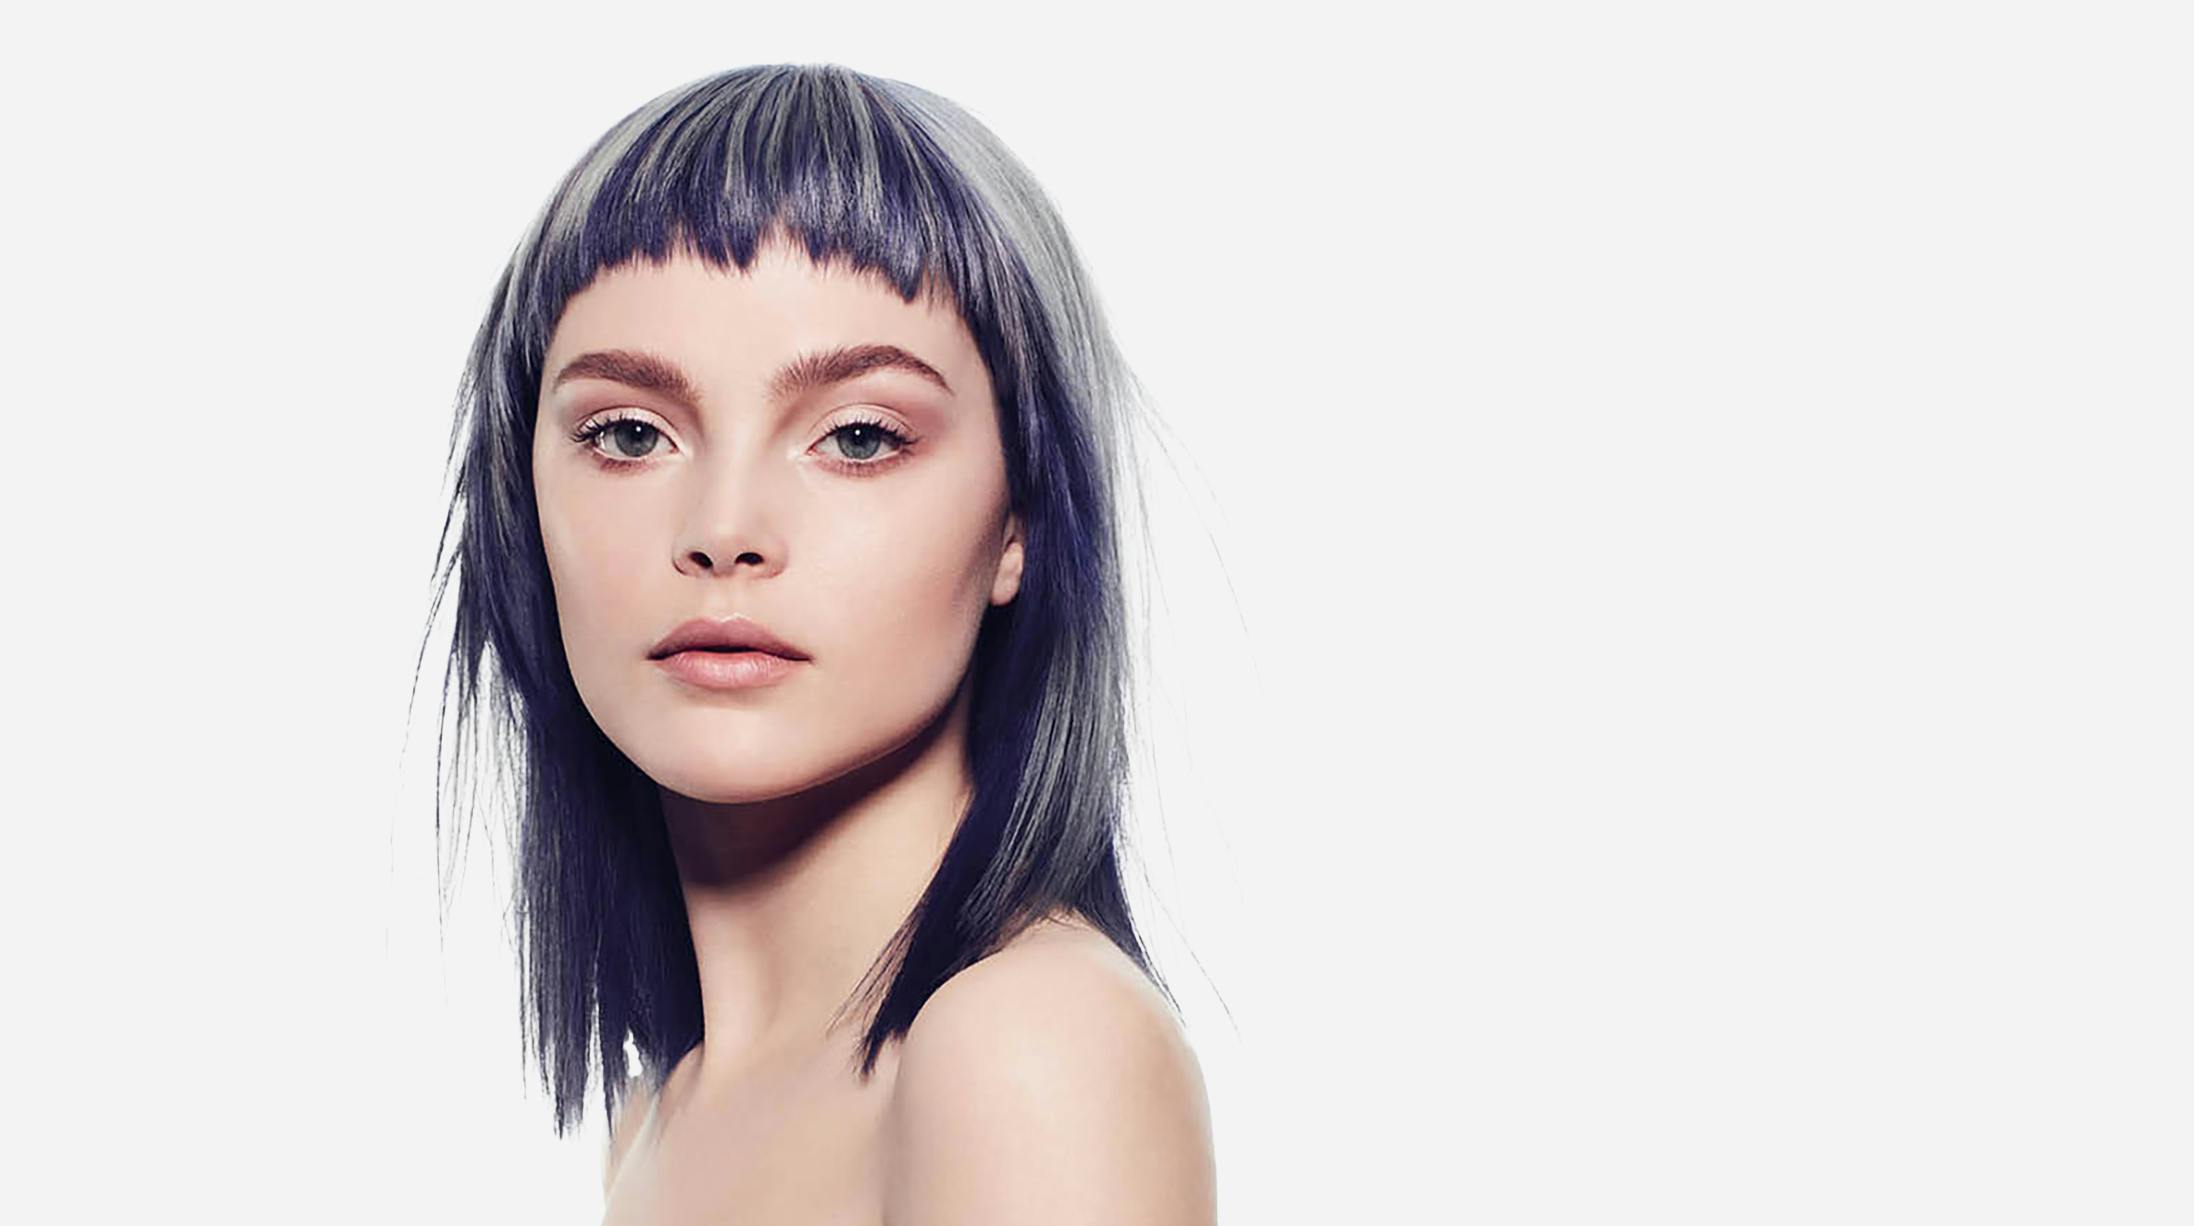 Sassoon Professionals’ colour line, a comprehensive colour system with infinite intermixing possibilities and an advanced conditioning system that gives spectacular high definition results